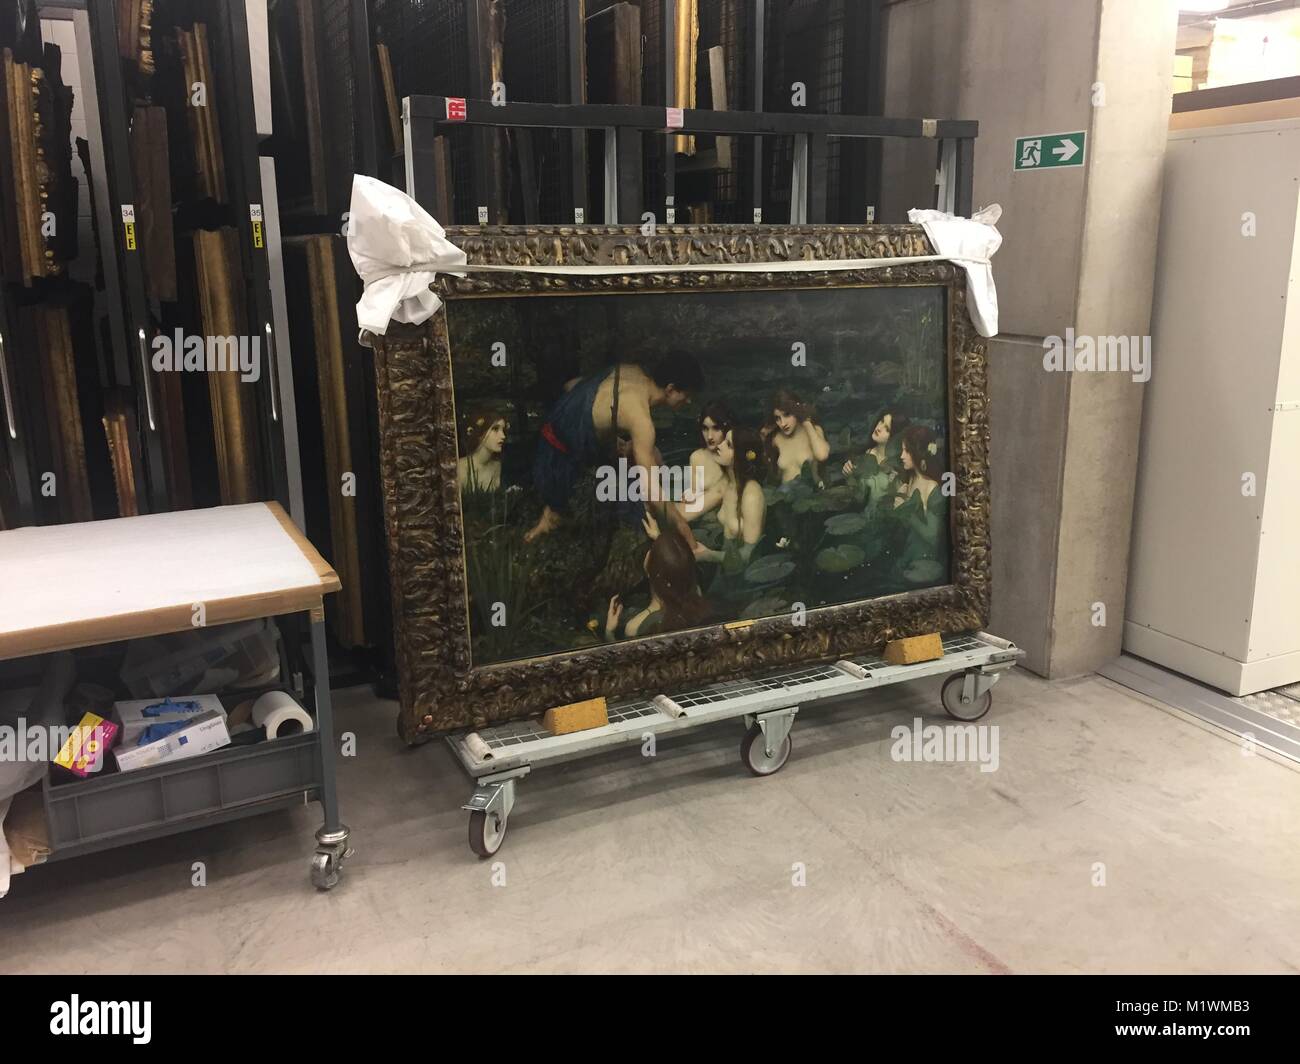 Manchester, England, 02 Febuary 2018. The painting 'Hylas and the Nymphs' (1896) by John William Waterhouse in the storeroom of the Manchester Art Gallery in Manchester, England, 02 Febuary 2018. The art gallery removed this painting from its exhibition due to its depiction of women - triggering a storm of indignation. Photo: Britta Schultejans/dpa Credit: dpa picture alliance/Alamy Live News Stock Photo